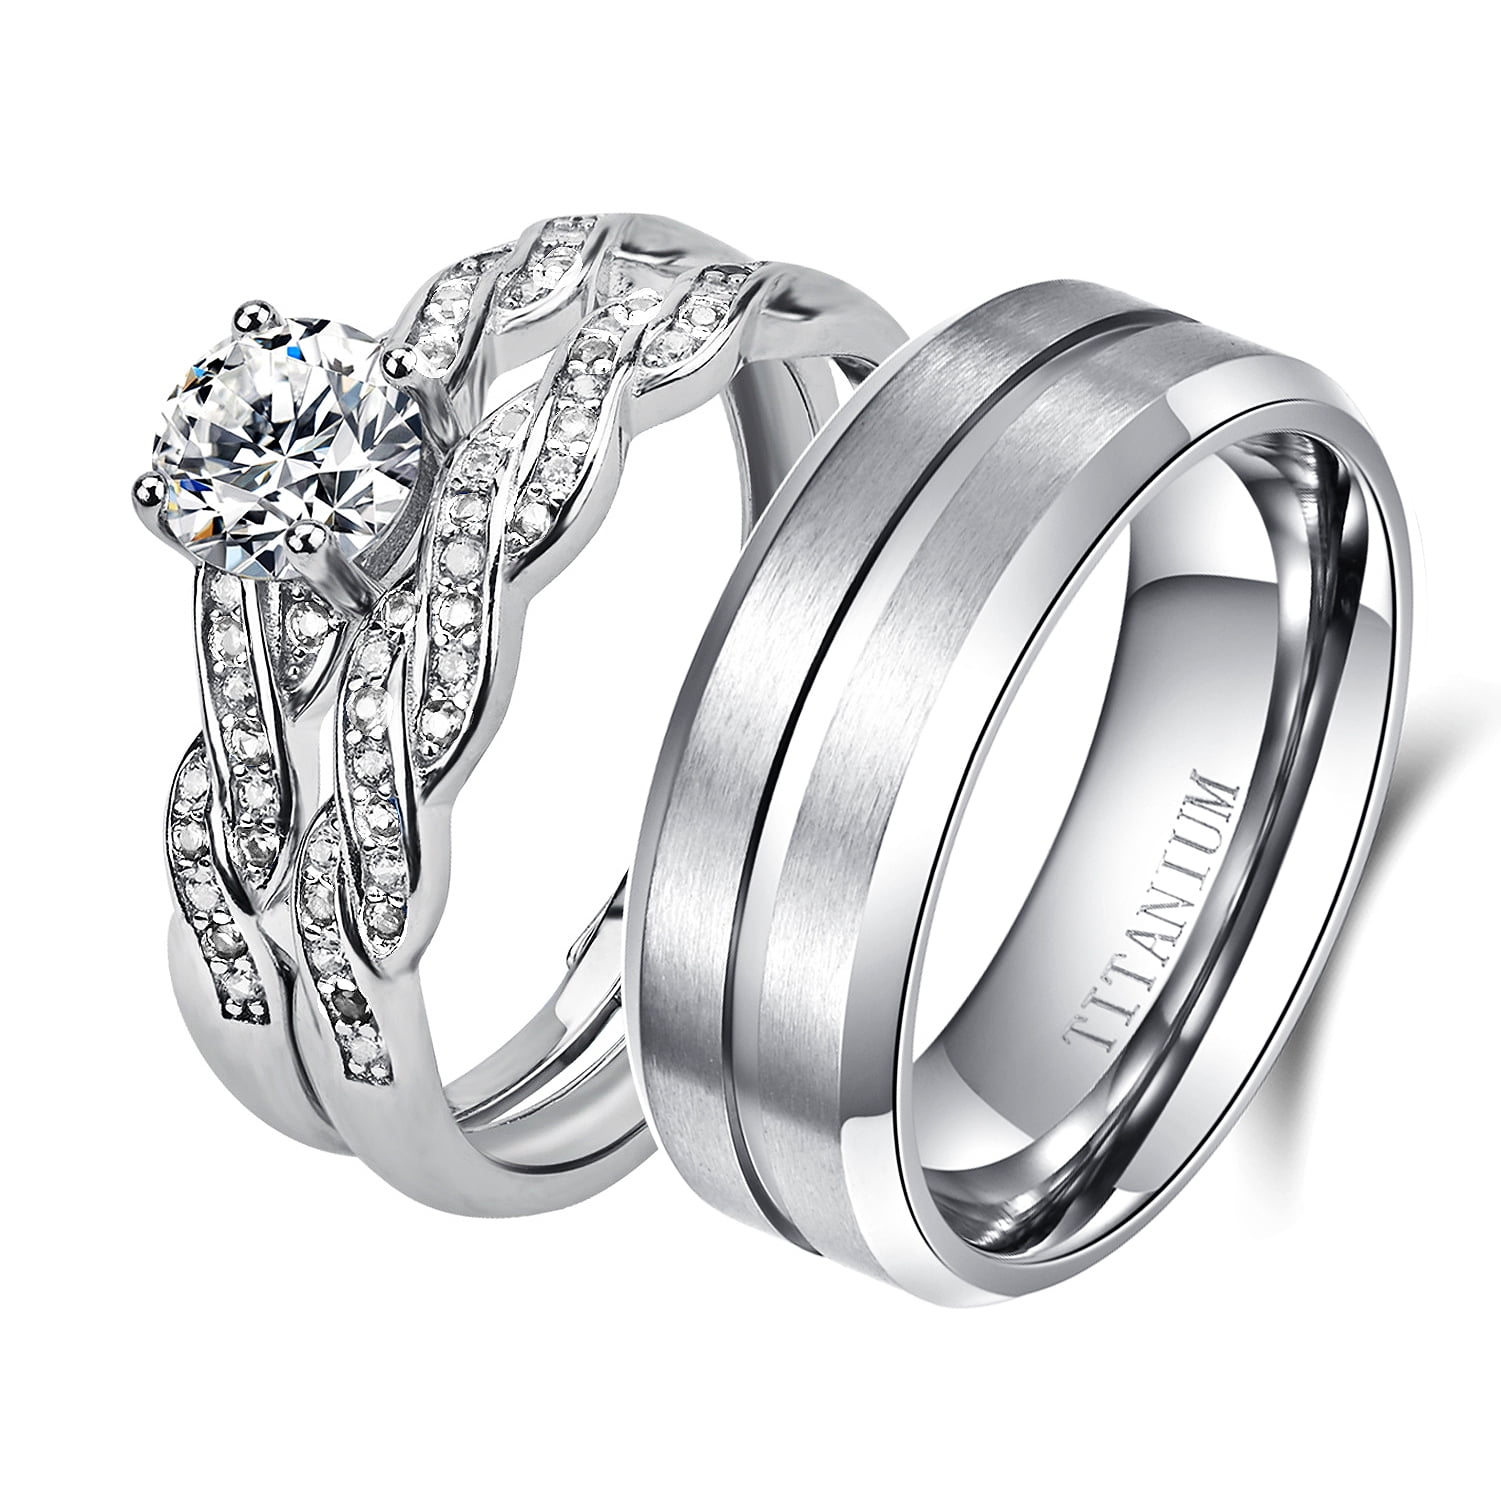 Zonkar Adjustable Couple Rings for lovers in Silver valentine gift &  proposal ring Alloy Cubic Zirconia Ring Set Steel Cubic Zirconia Silver  Plated Ring Set Sterling Silver Silver Plated Ring Set Price